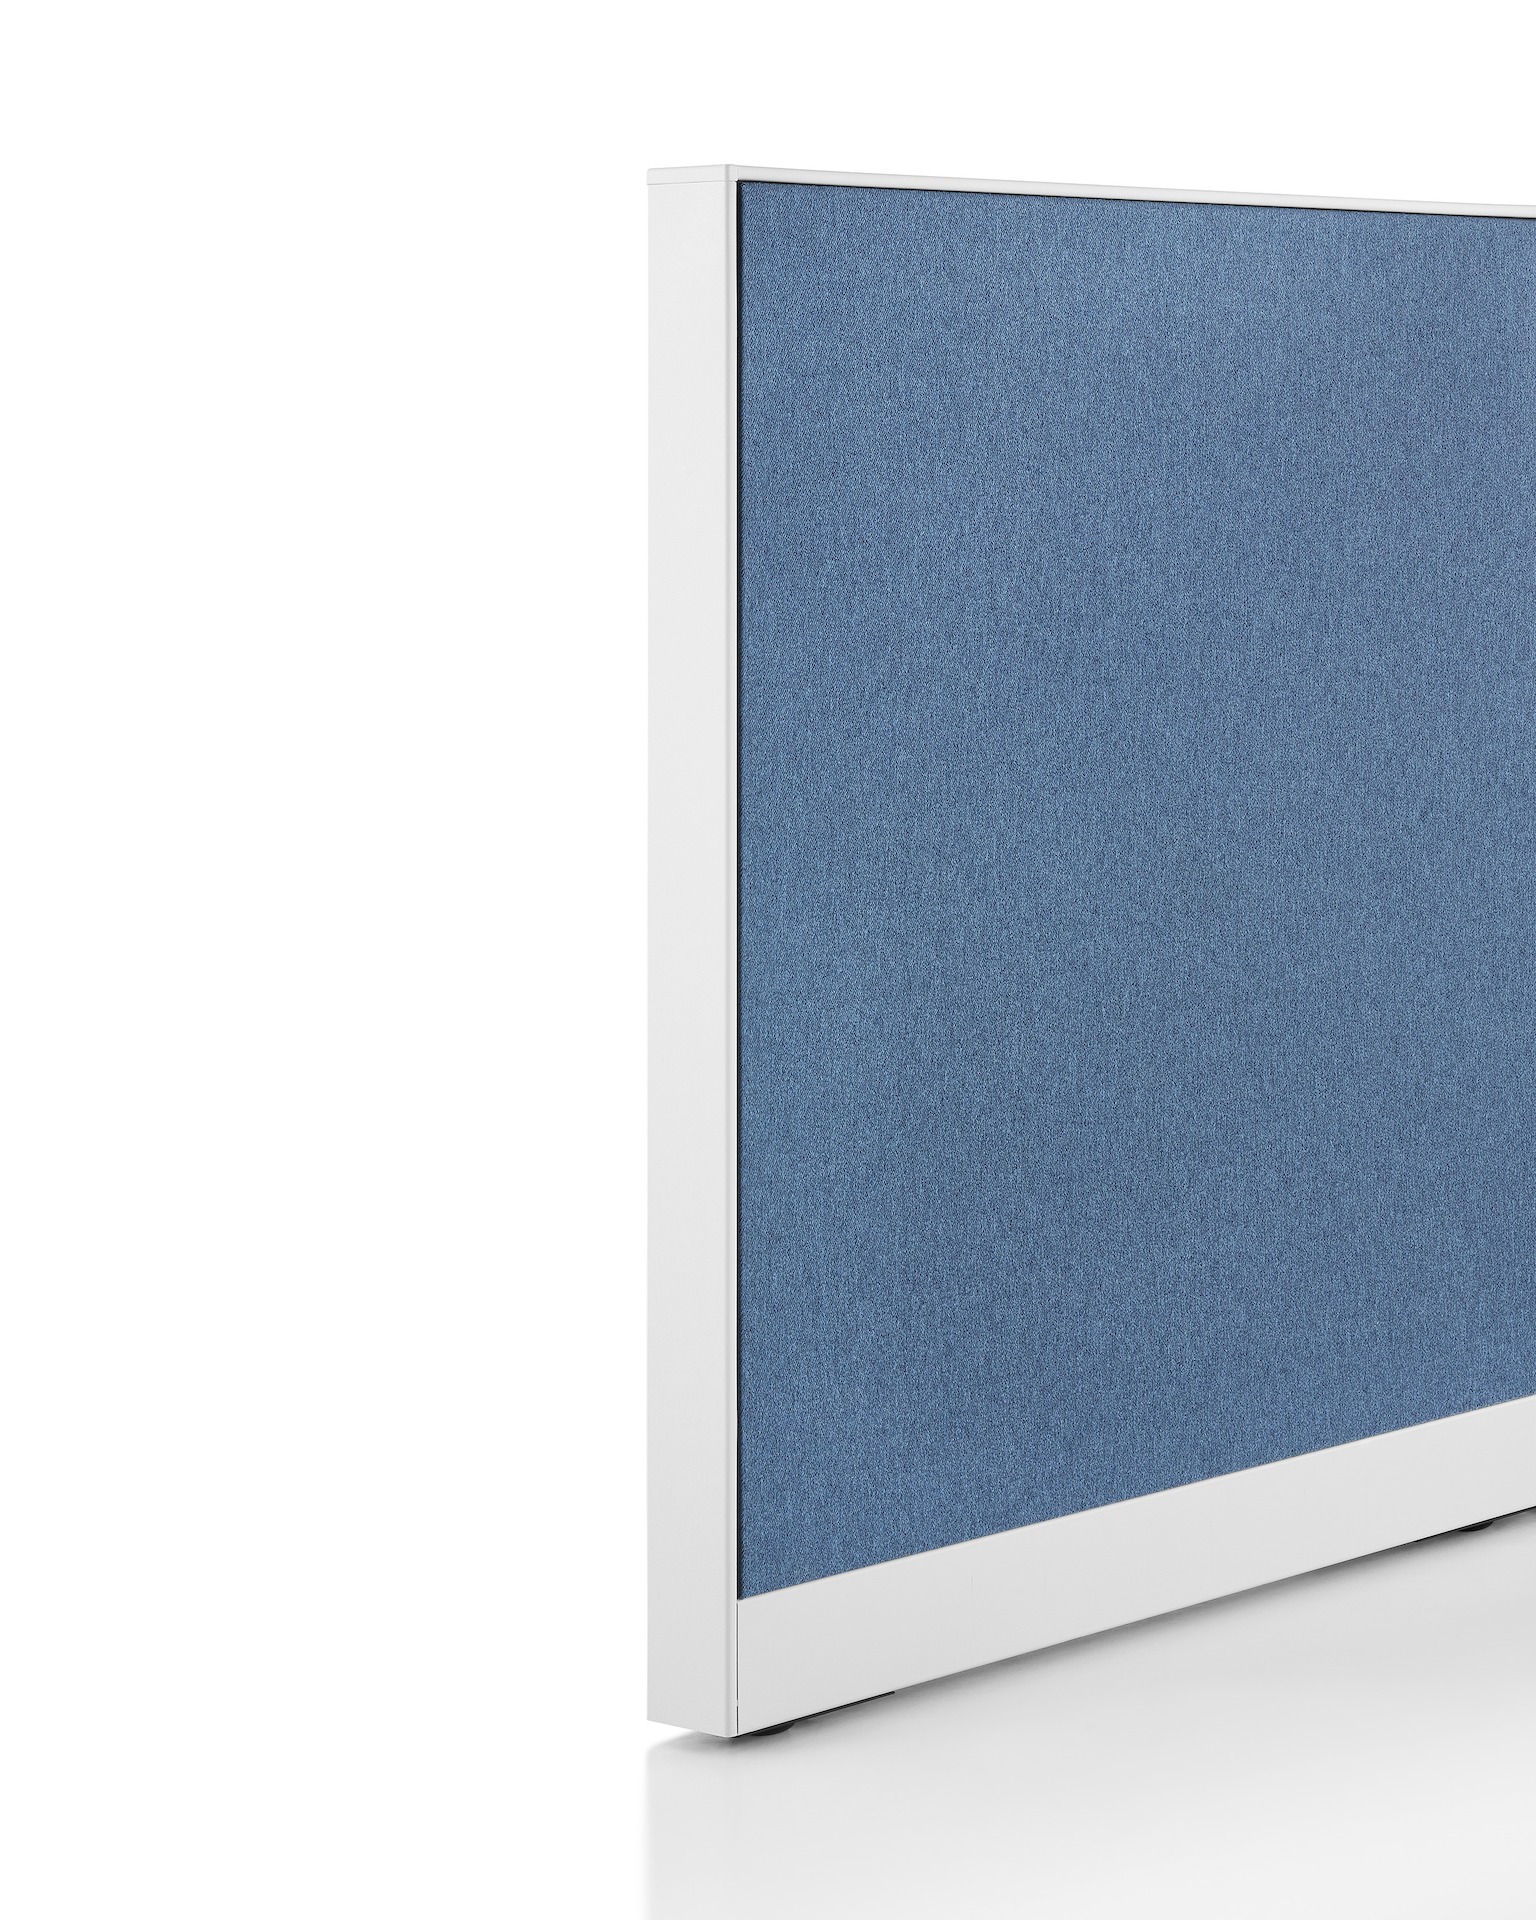 Image of canvas wall end panel in blue with white kick panel.